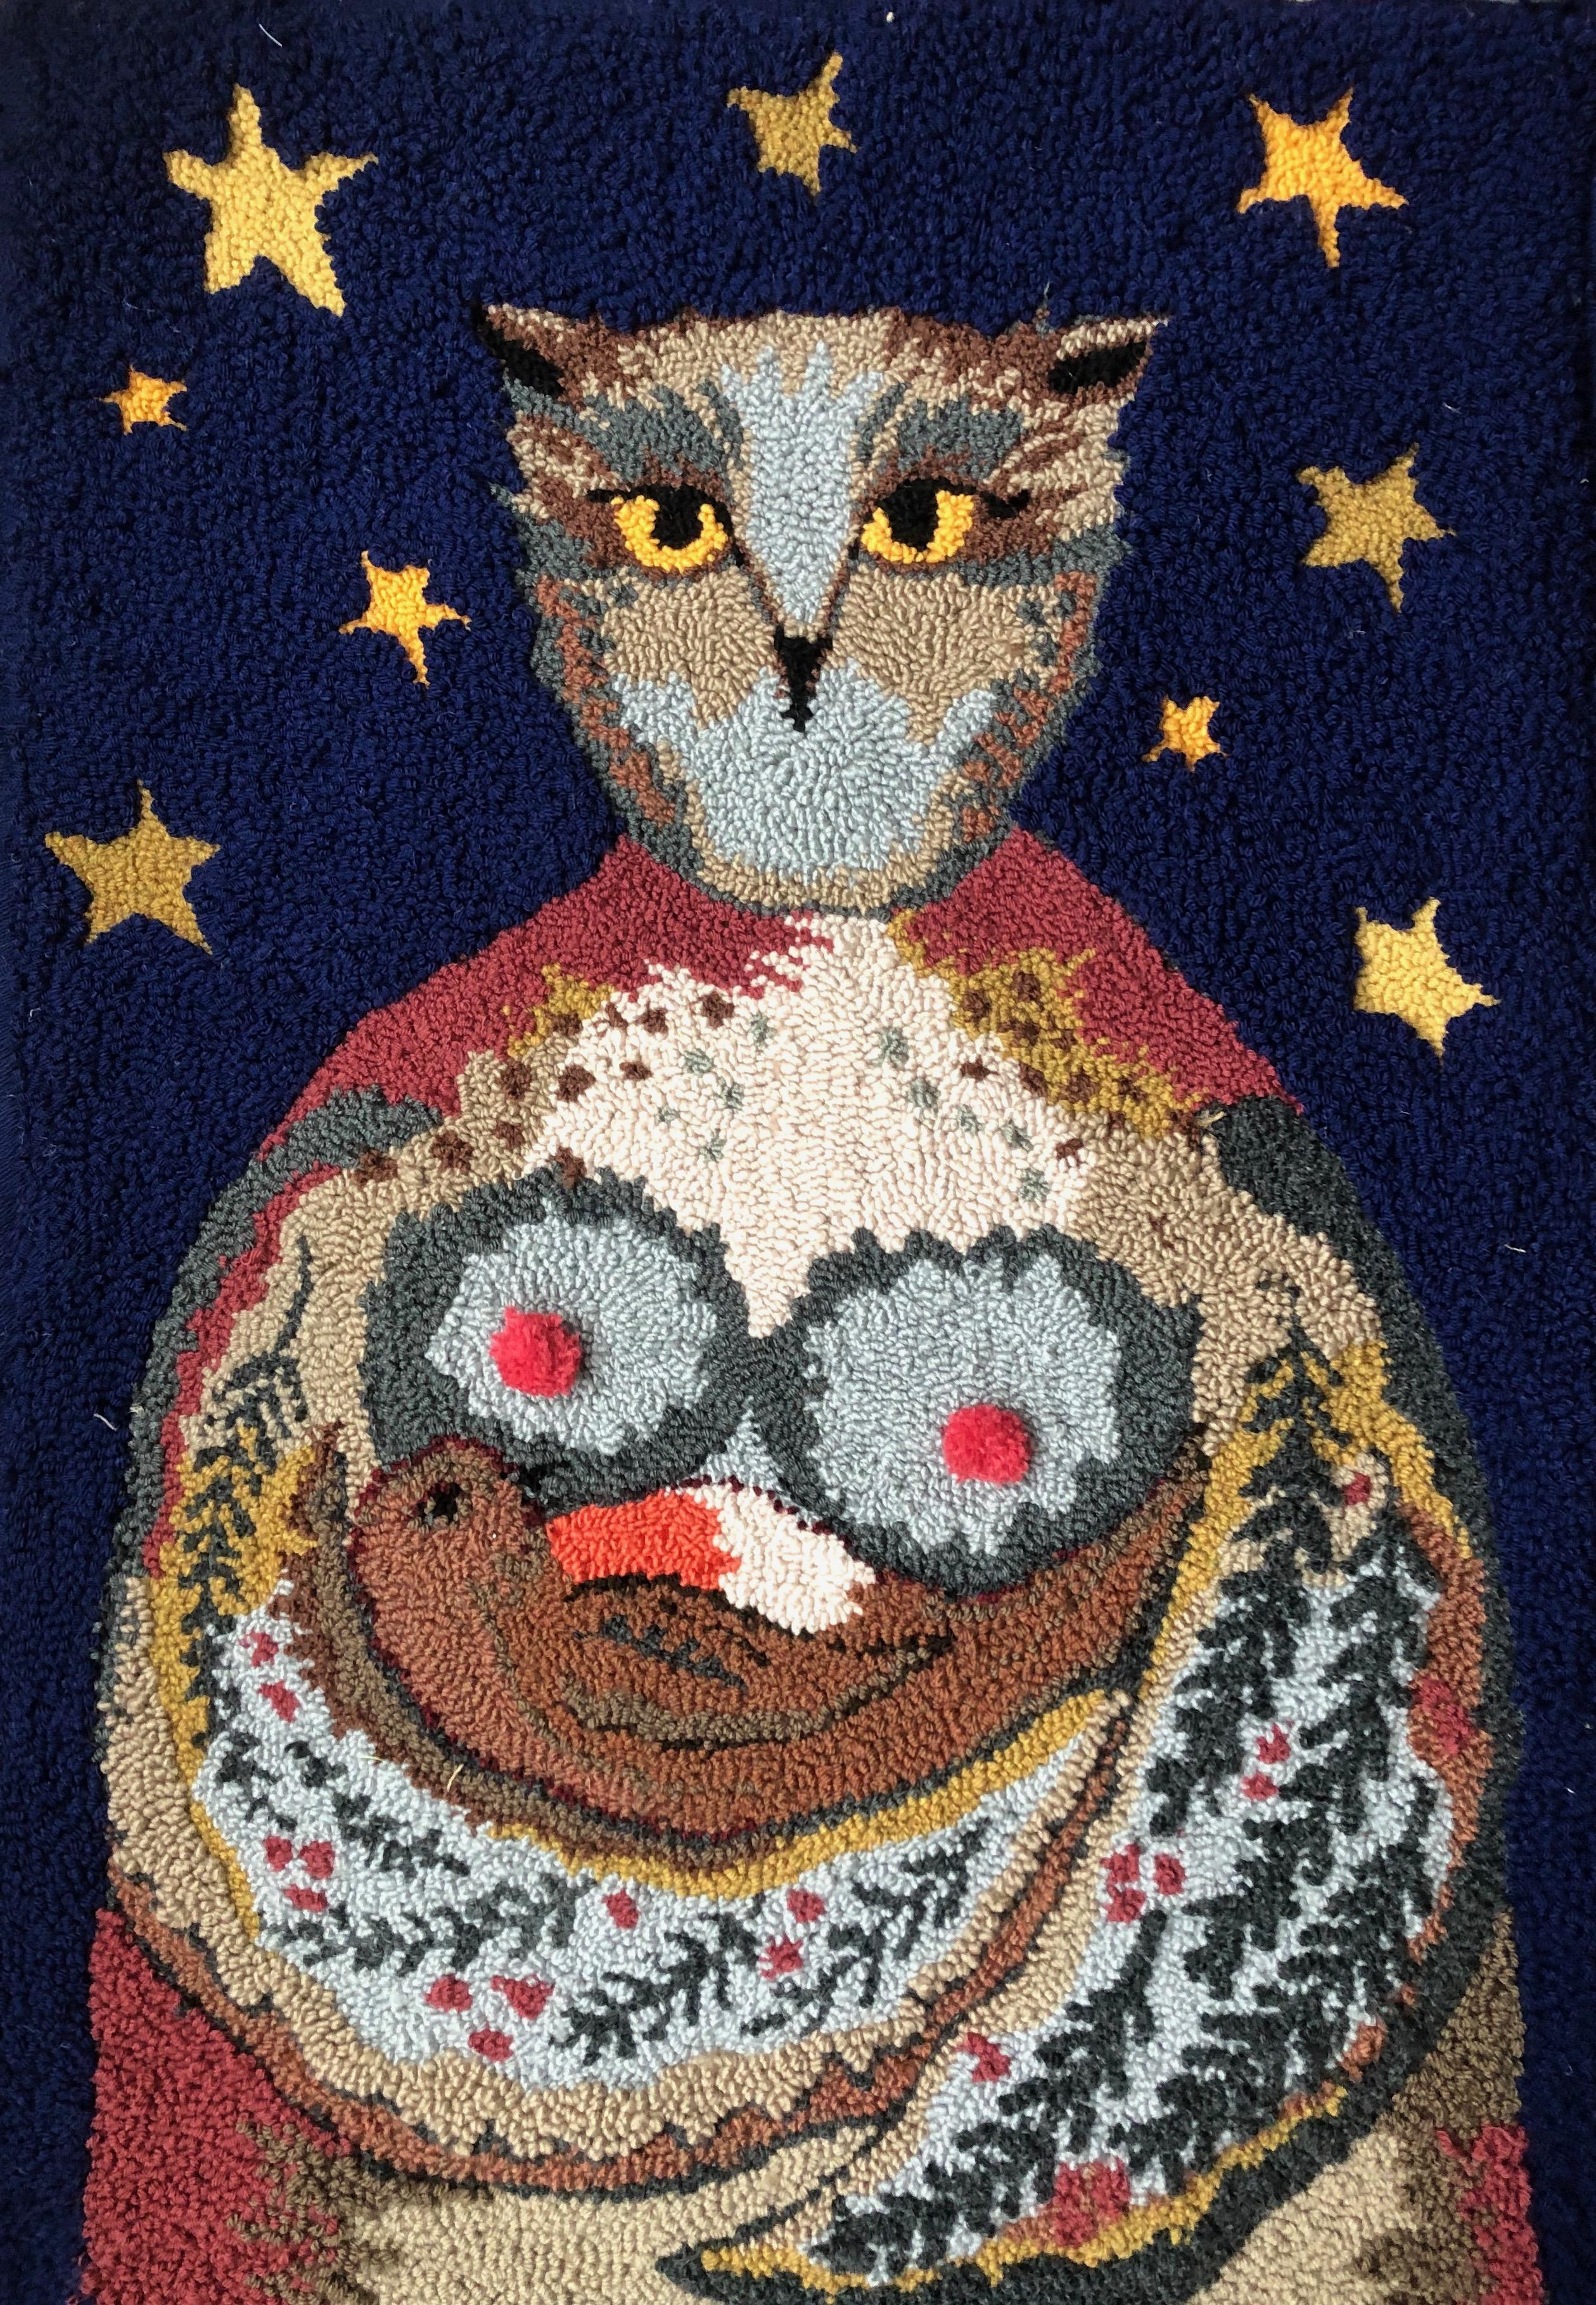 Textile art of an owl by Selby Hurst Inglefield with a starry night background